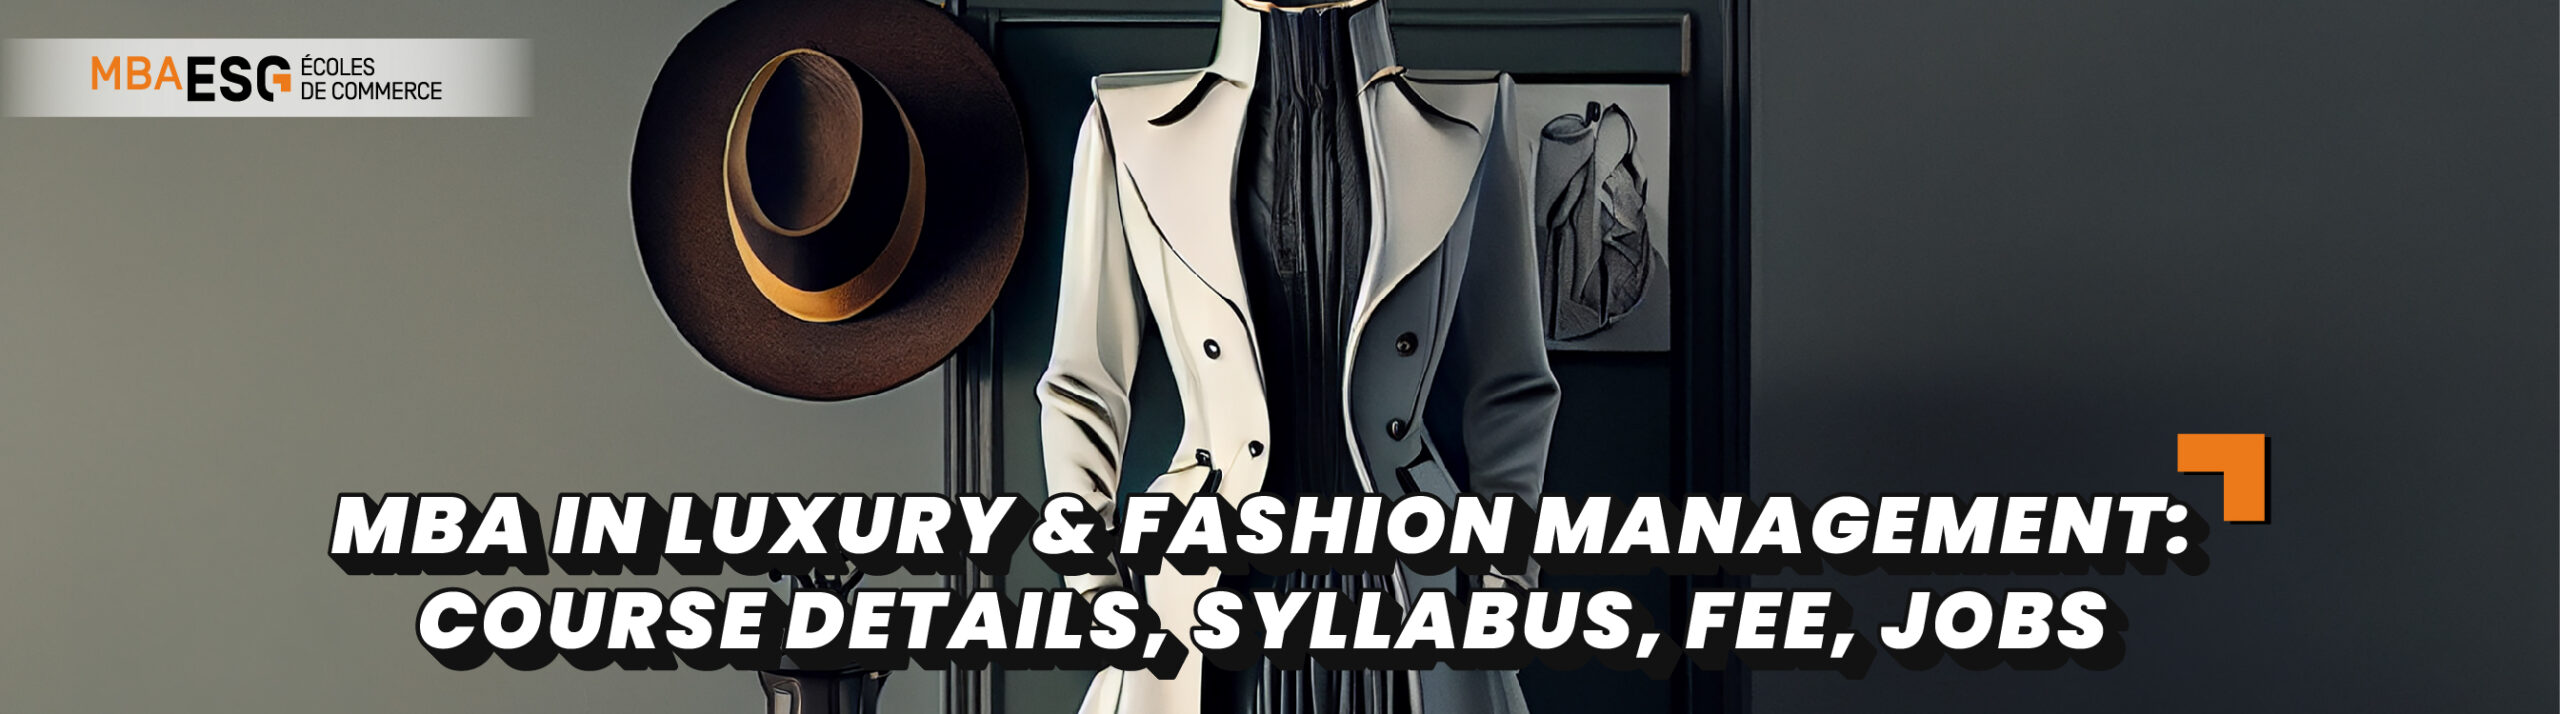 MBA in Luxury & Fashion Management: Course Details, Syllabus, Fee, Jobs